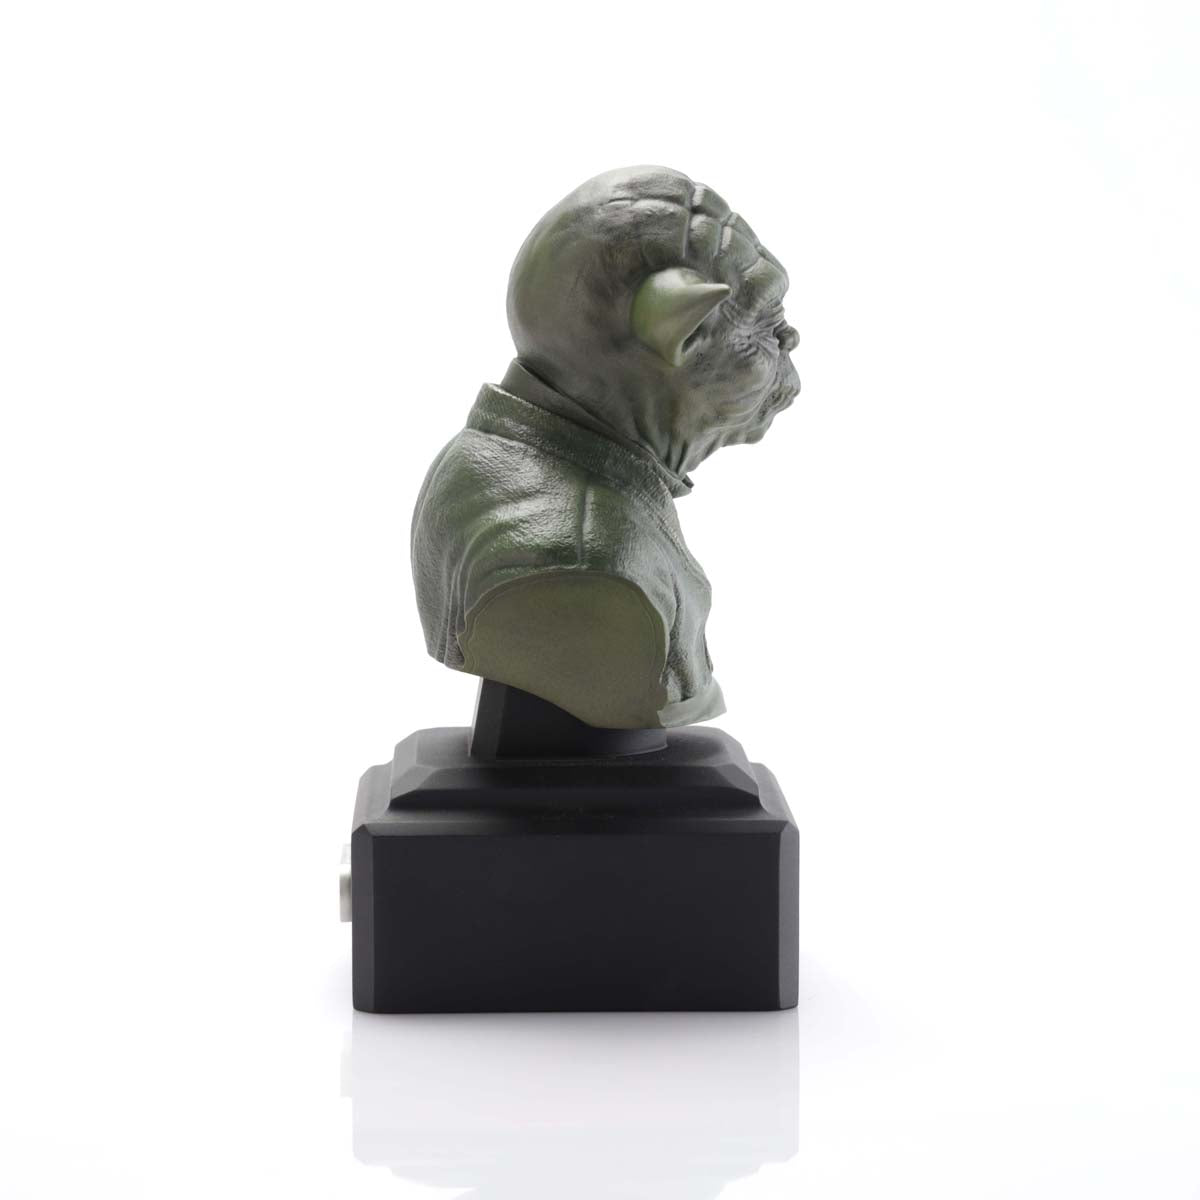 Yoda Limited Edition Bust - Star Wars Collectible Gift - RS Figures